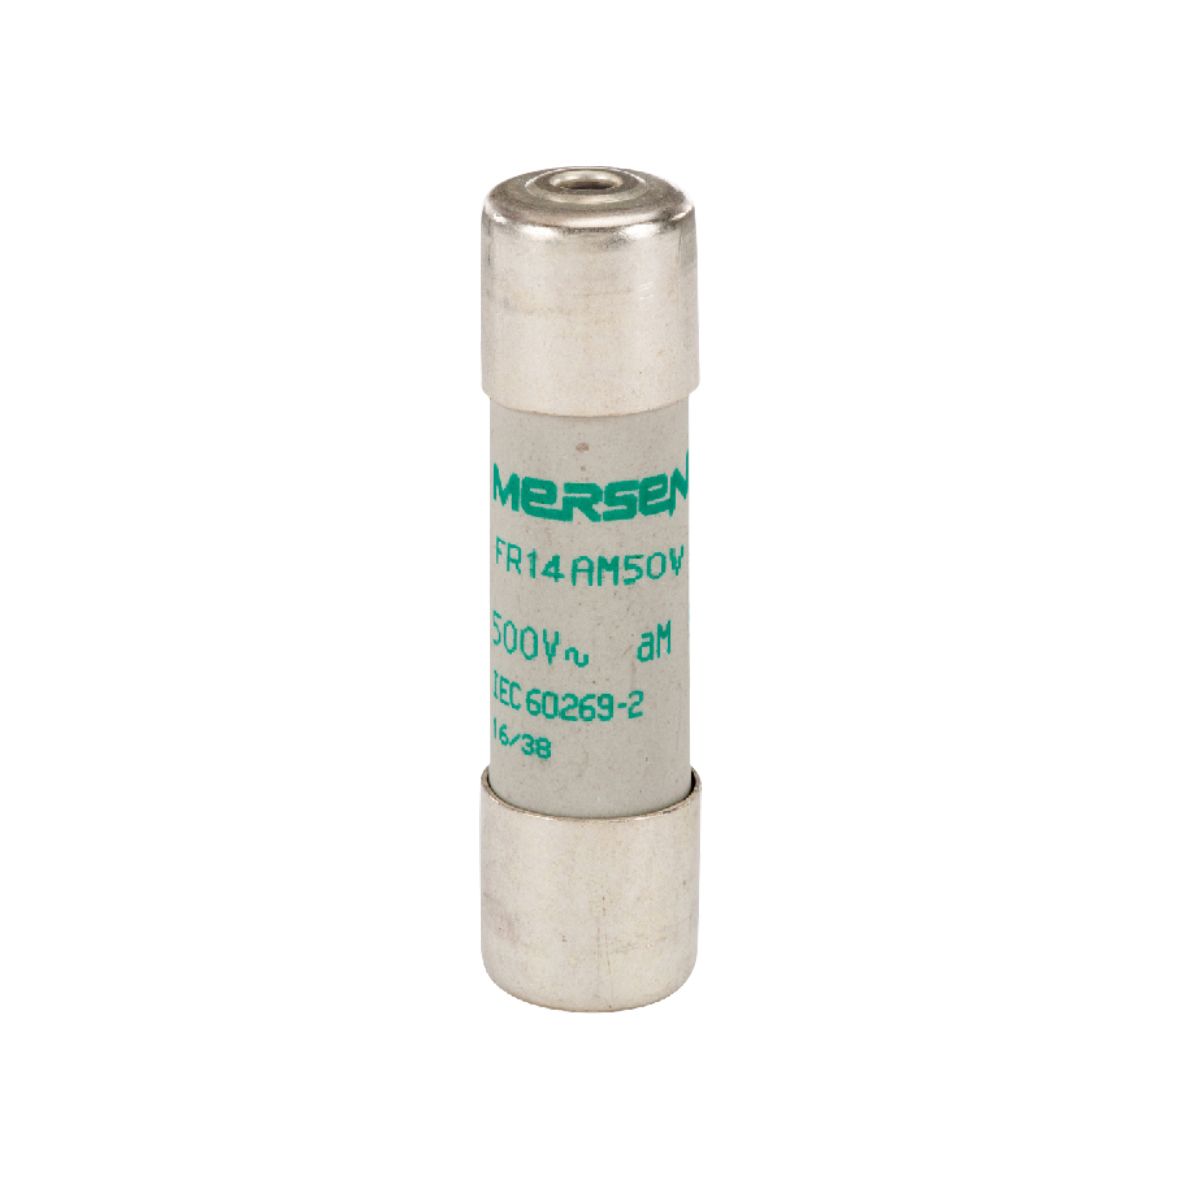 E212593 - Cylindrical fuse-link aM 500VAC 14.3x51, 20A with striker